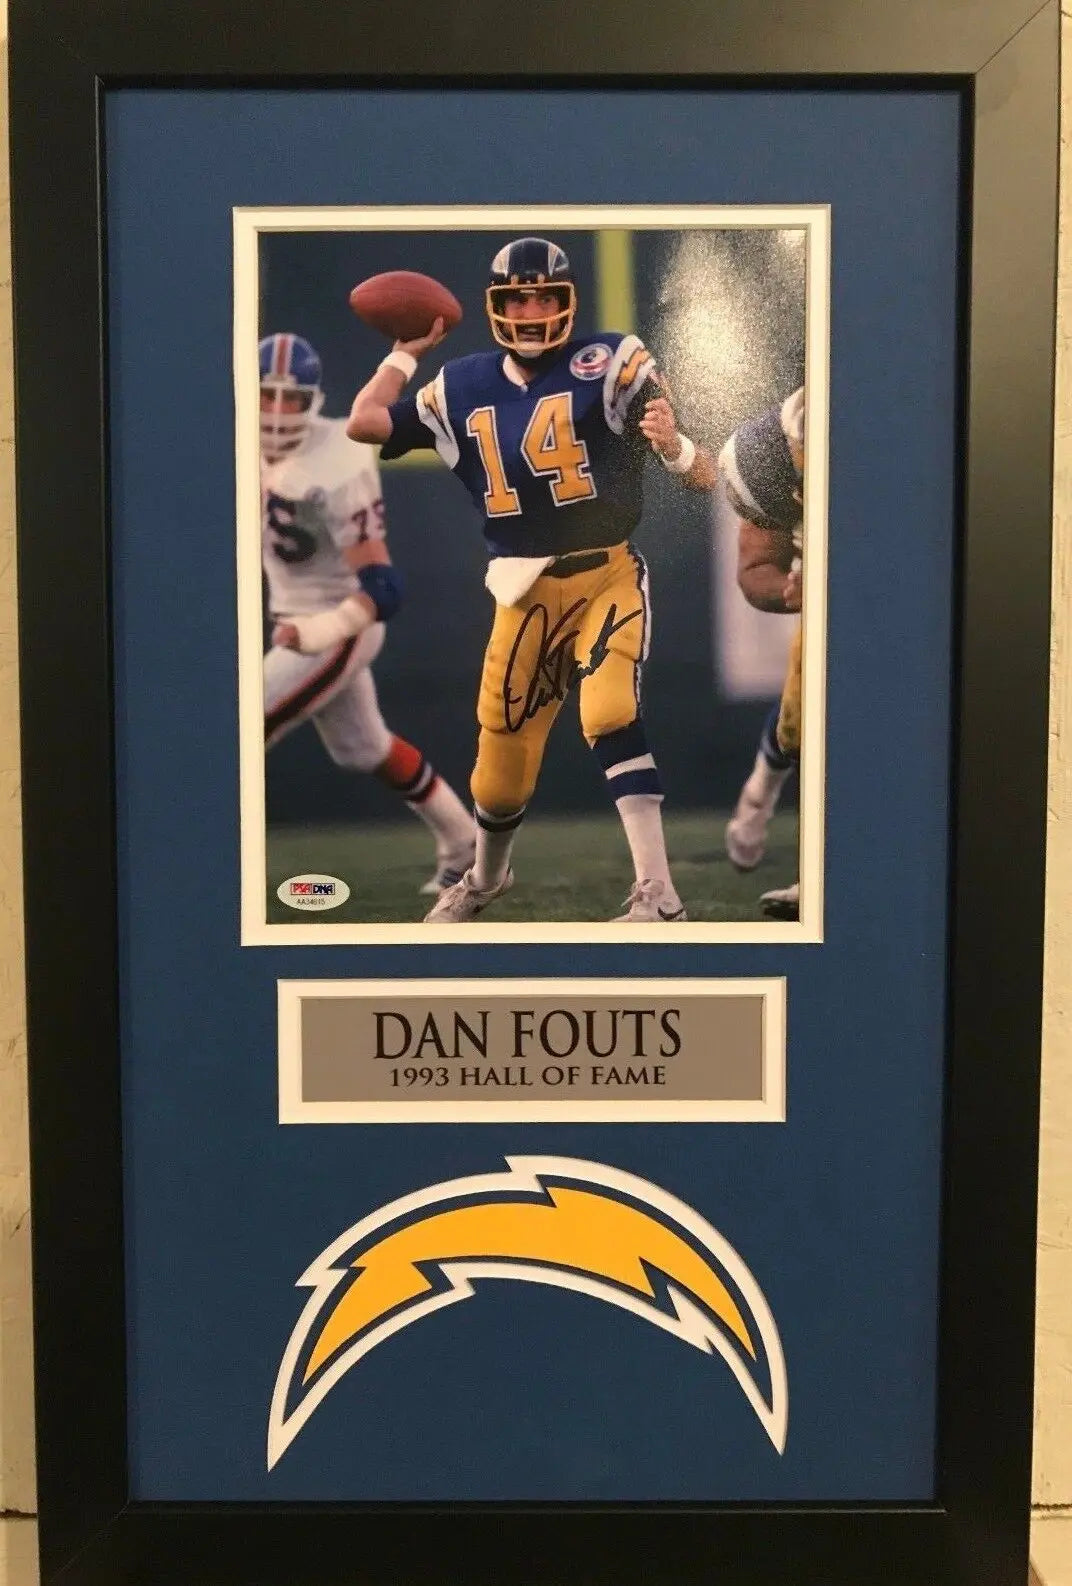 MVP Authentics Framed Signed Autographed Dan Fouts San Diego Chargers 8X10 Photo Psa Coa 117 sports jersey framing , jersey framing